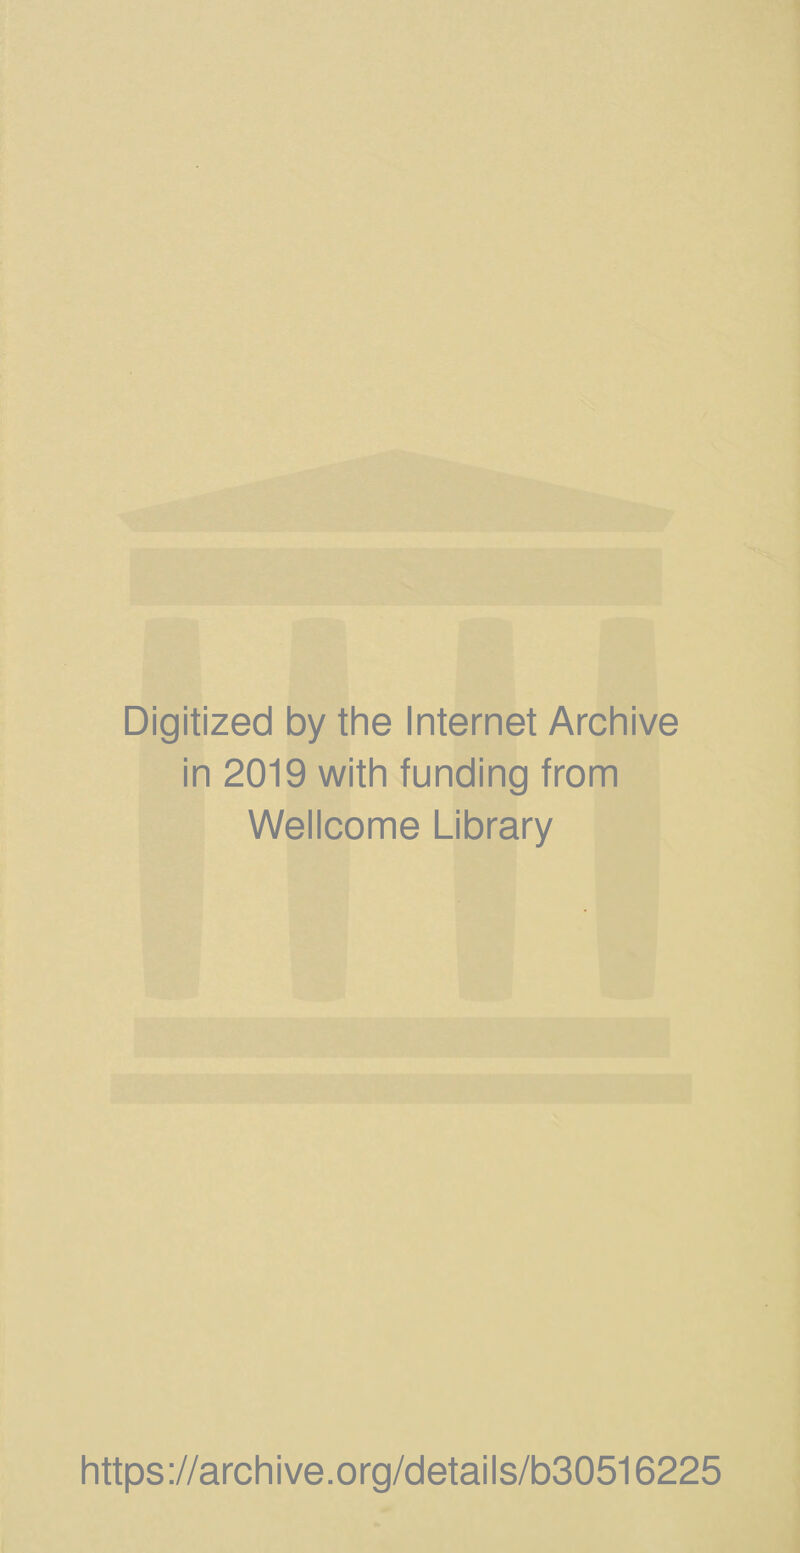 Digitized by the Internet Archive in 2019 with funding from Wellcome Library https://archive.org/details/b30516225